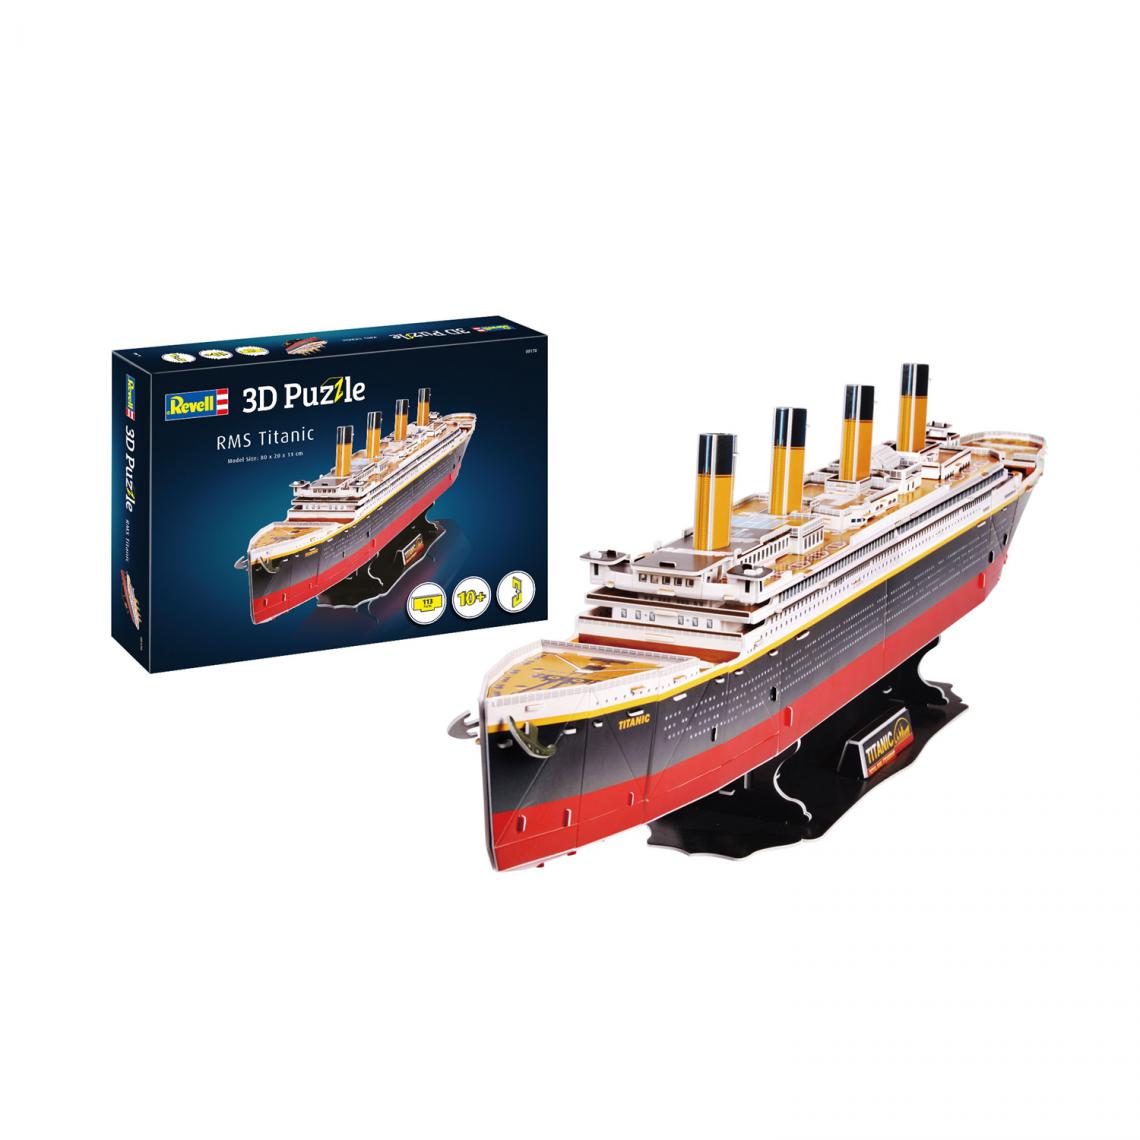 Revell - Revell 00170 - Puzzle 3D RMS Titanic - Animaux